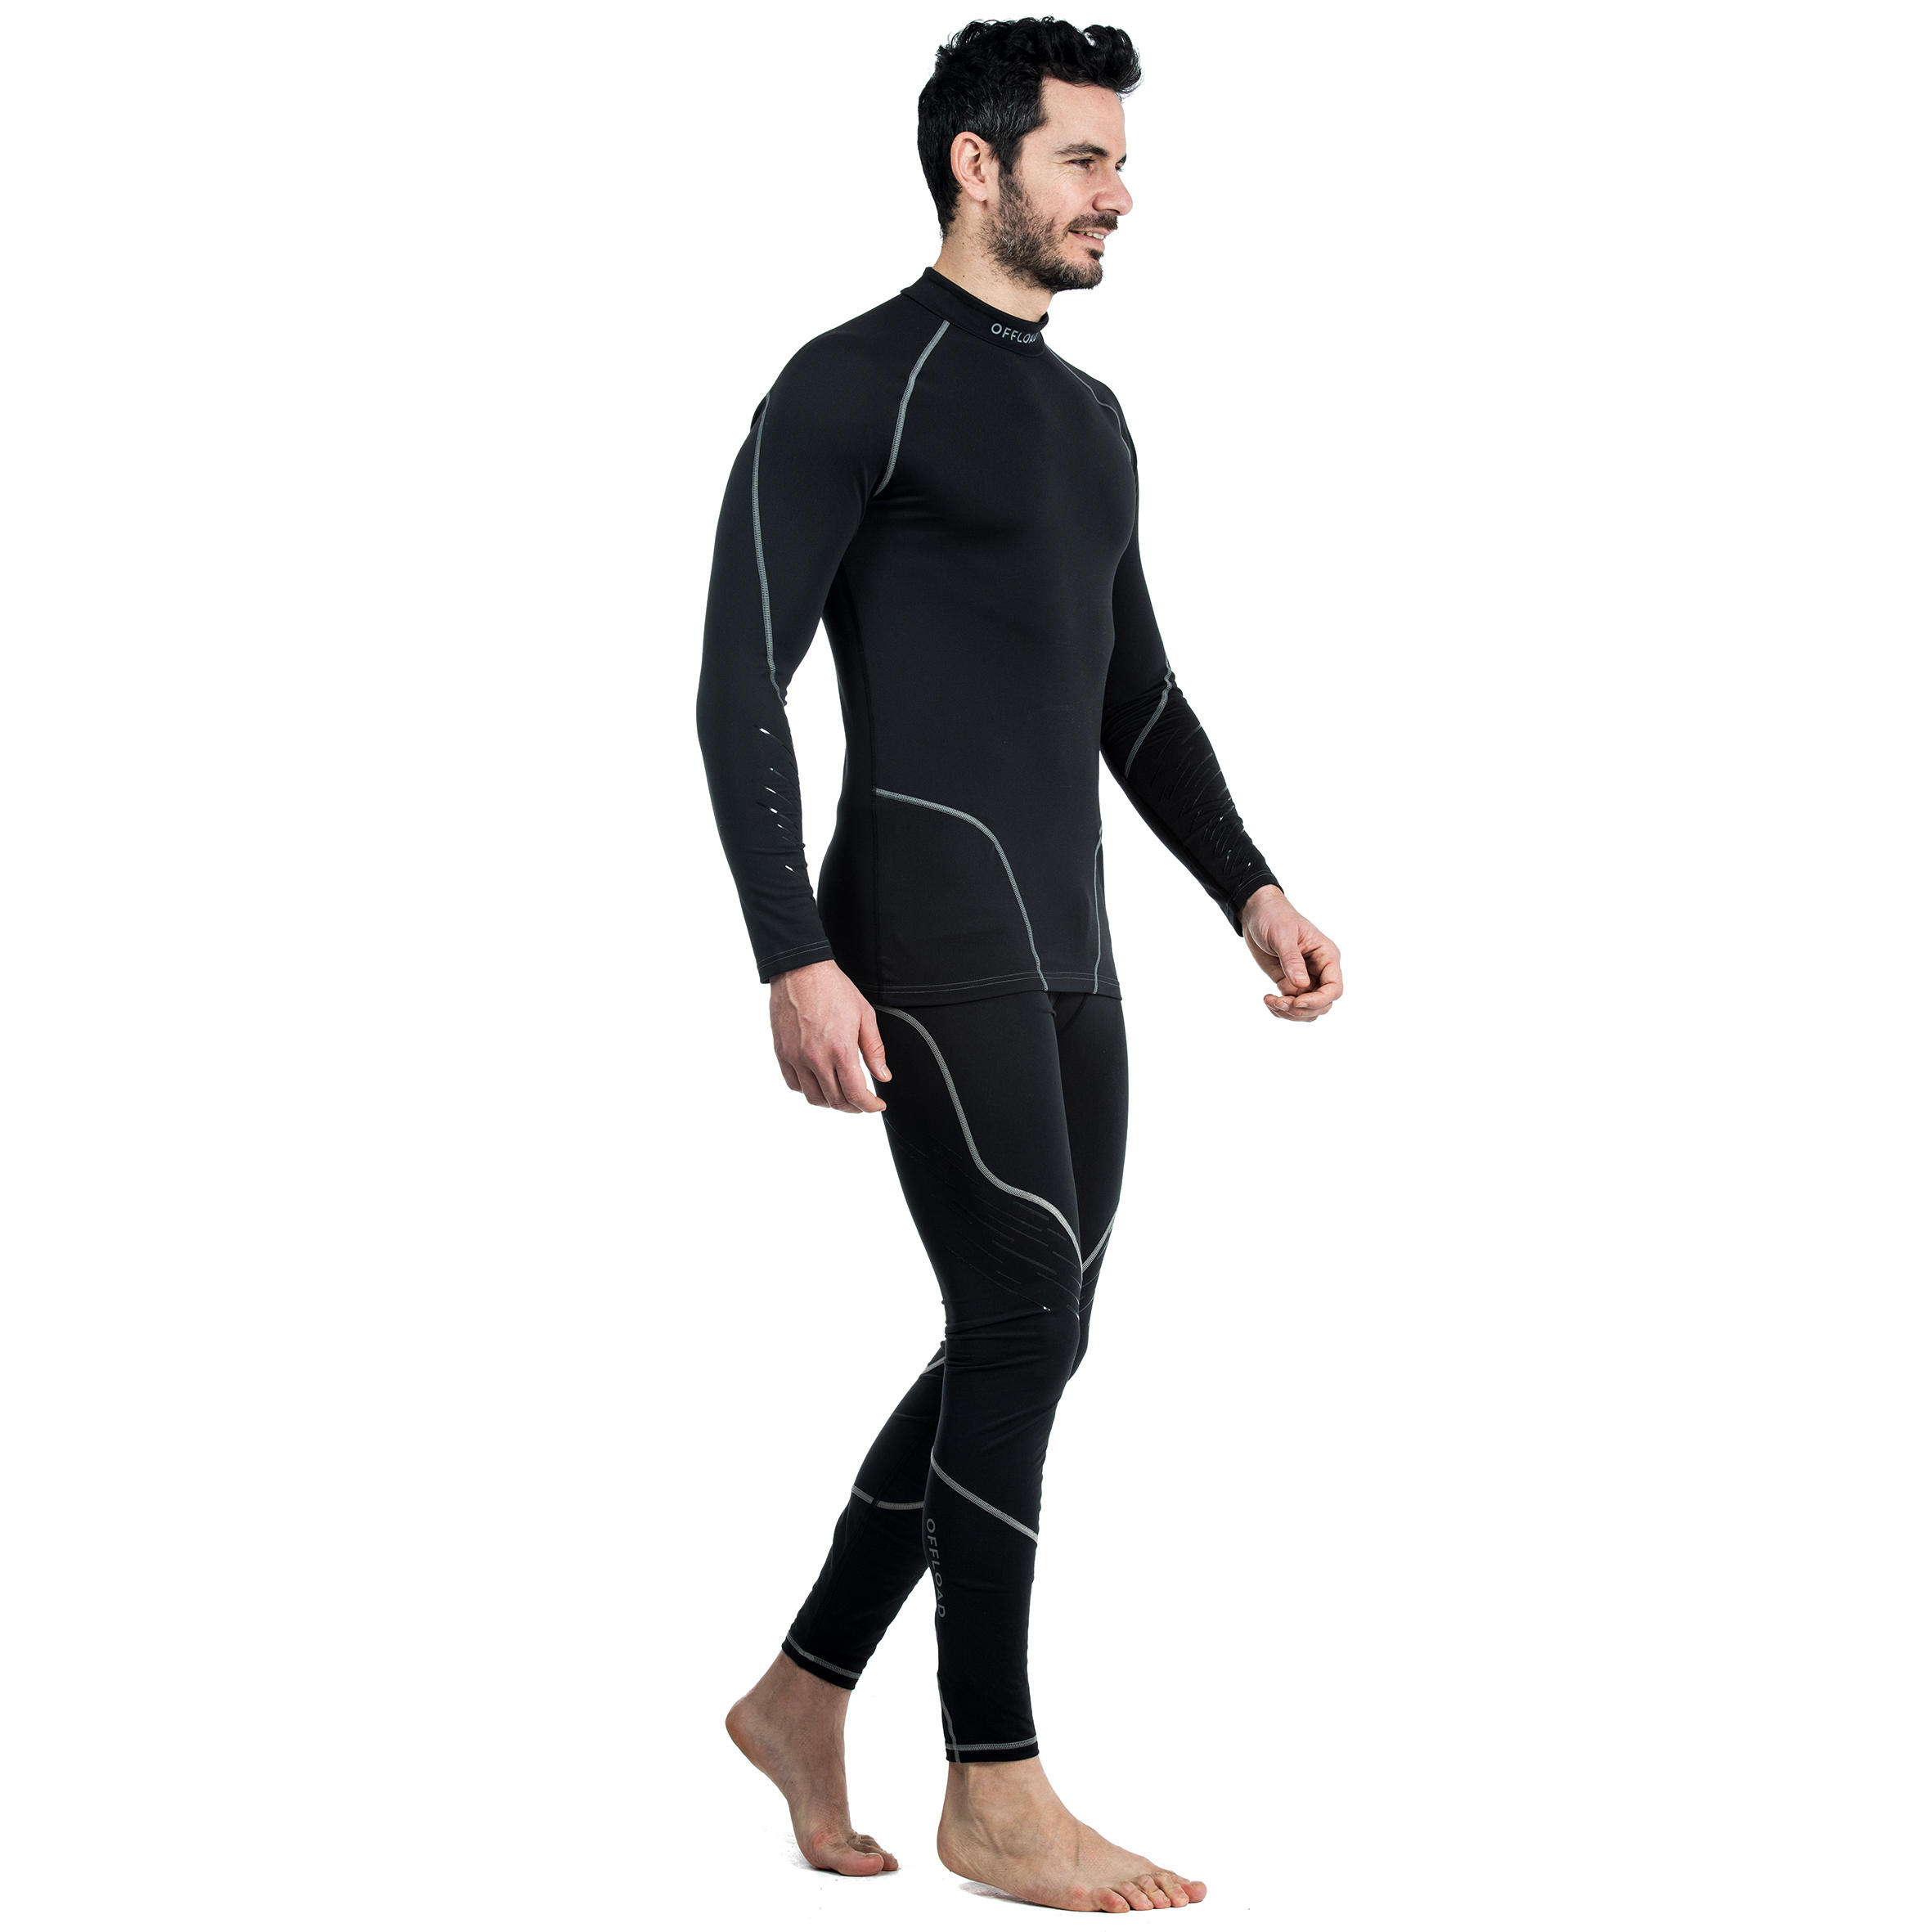 Men's Long-Sleeved Rugby Base Layer Top R500 - Black 10/10